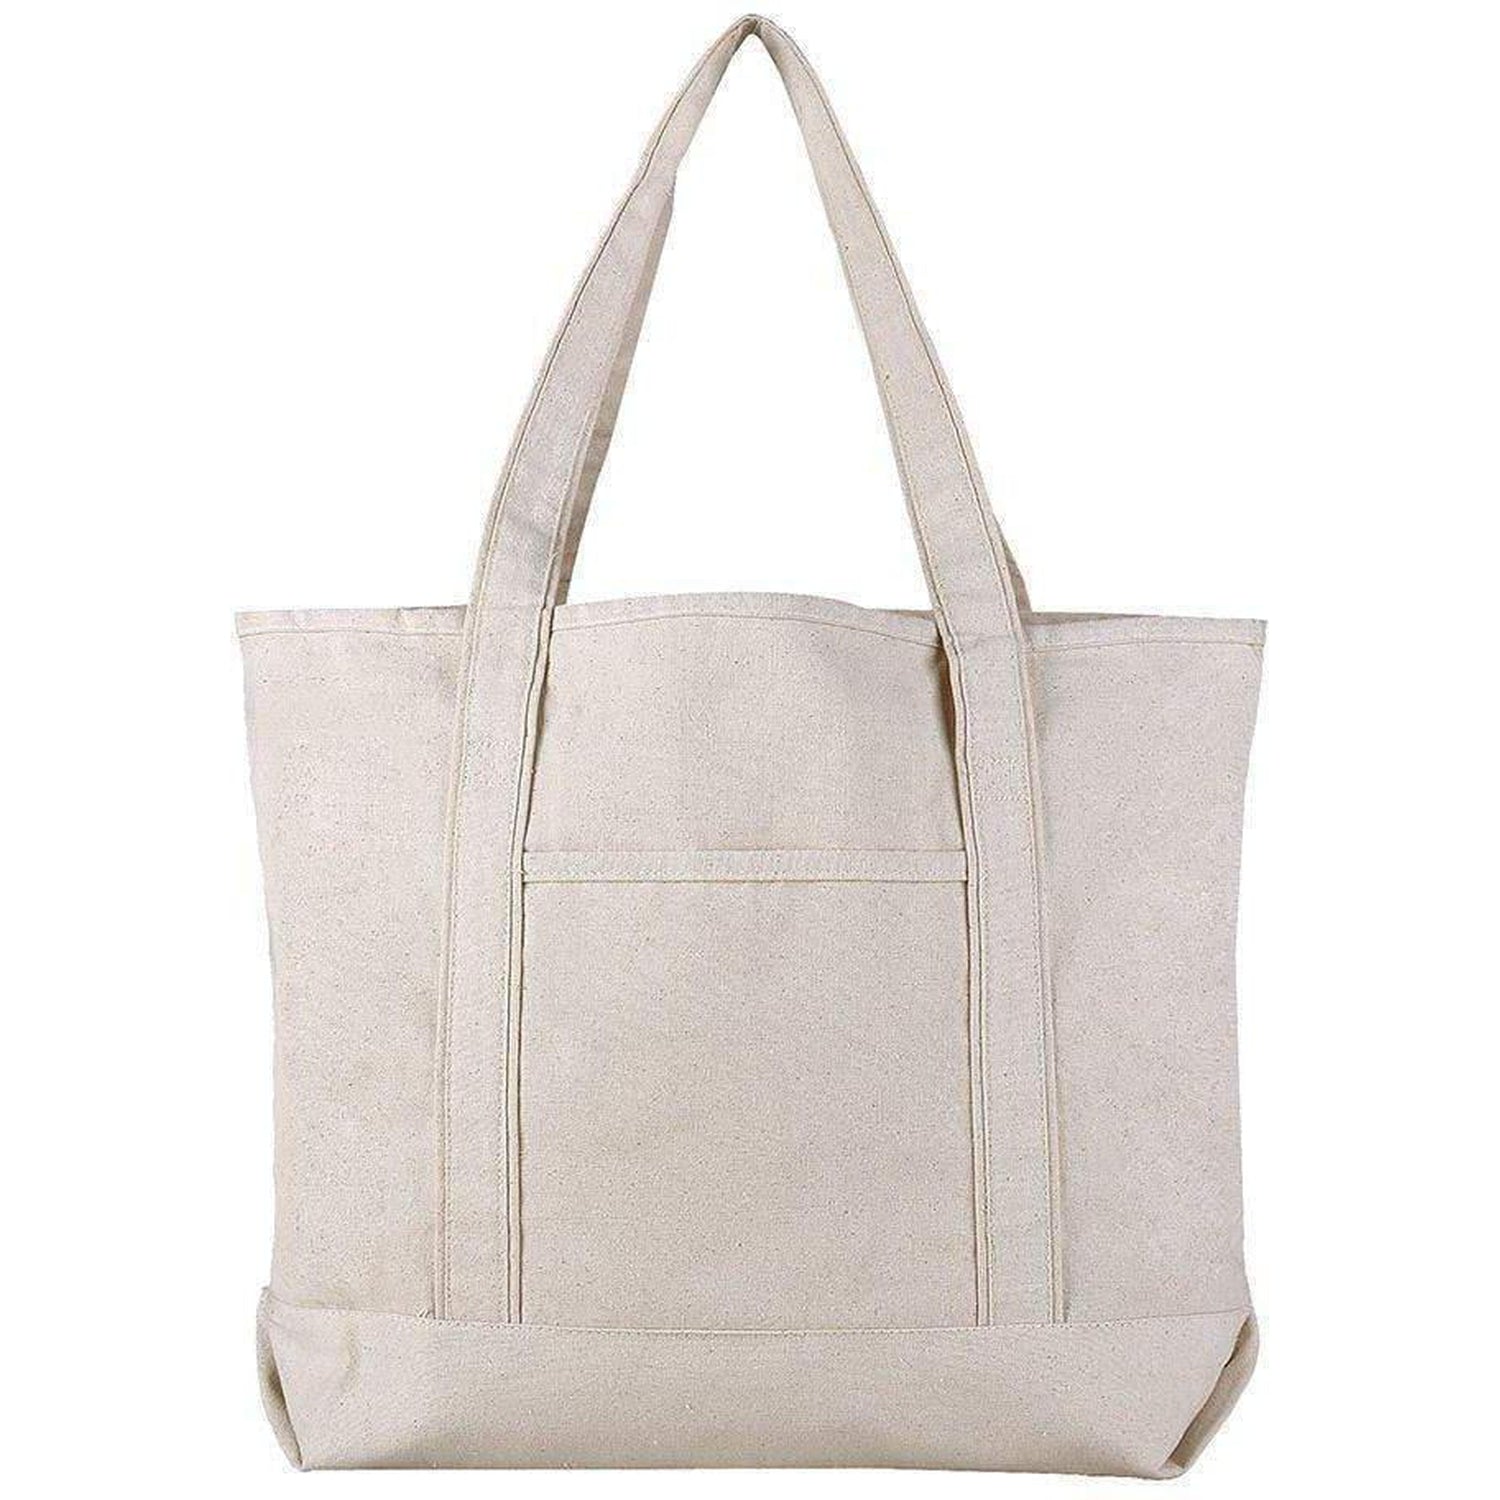 Extra Large Canvas Tote Bags Wholesale - Bulk Canvas Boat Tote Bags